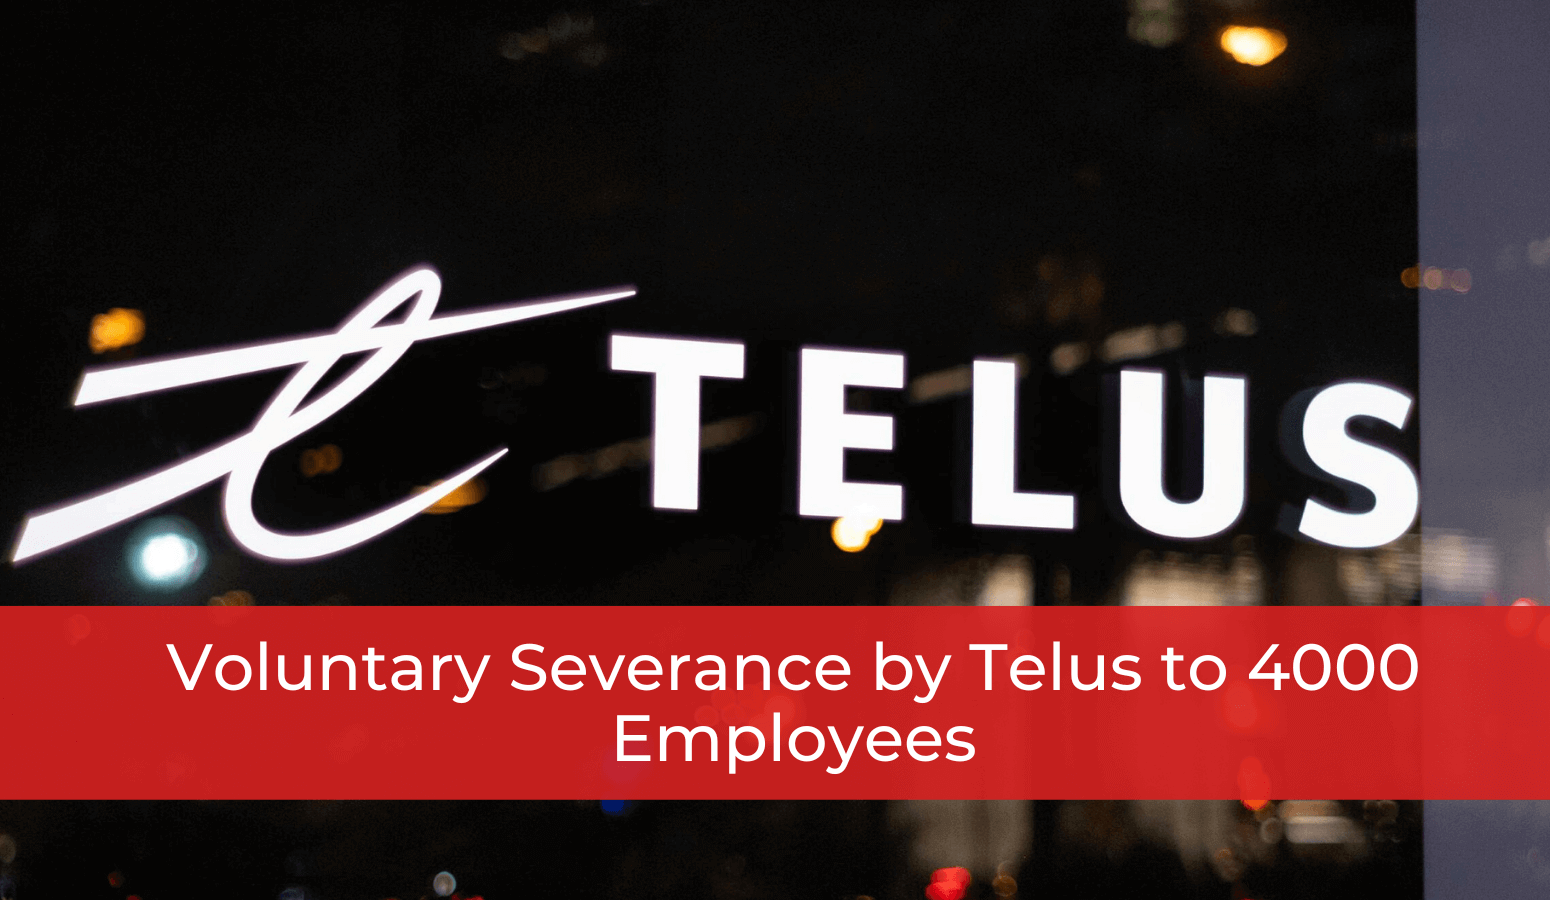 Featured image for “Voluntary Severance by Telus to 4000 Employees”